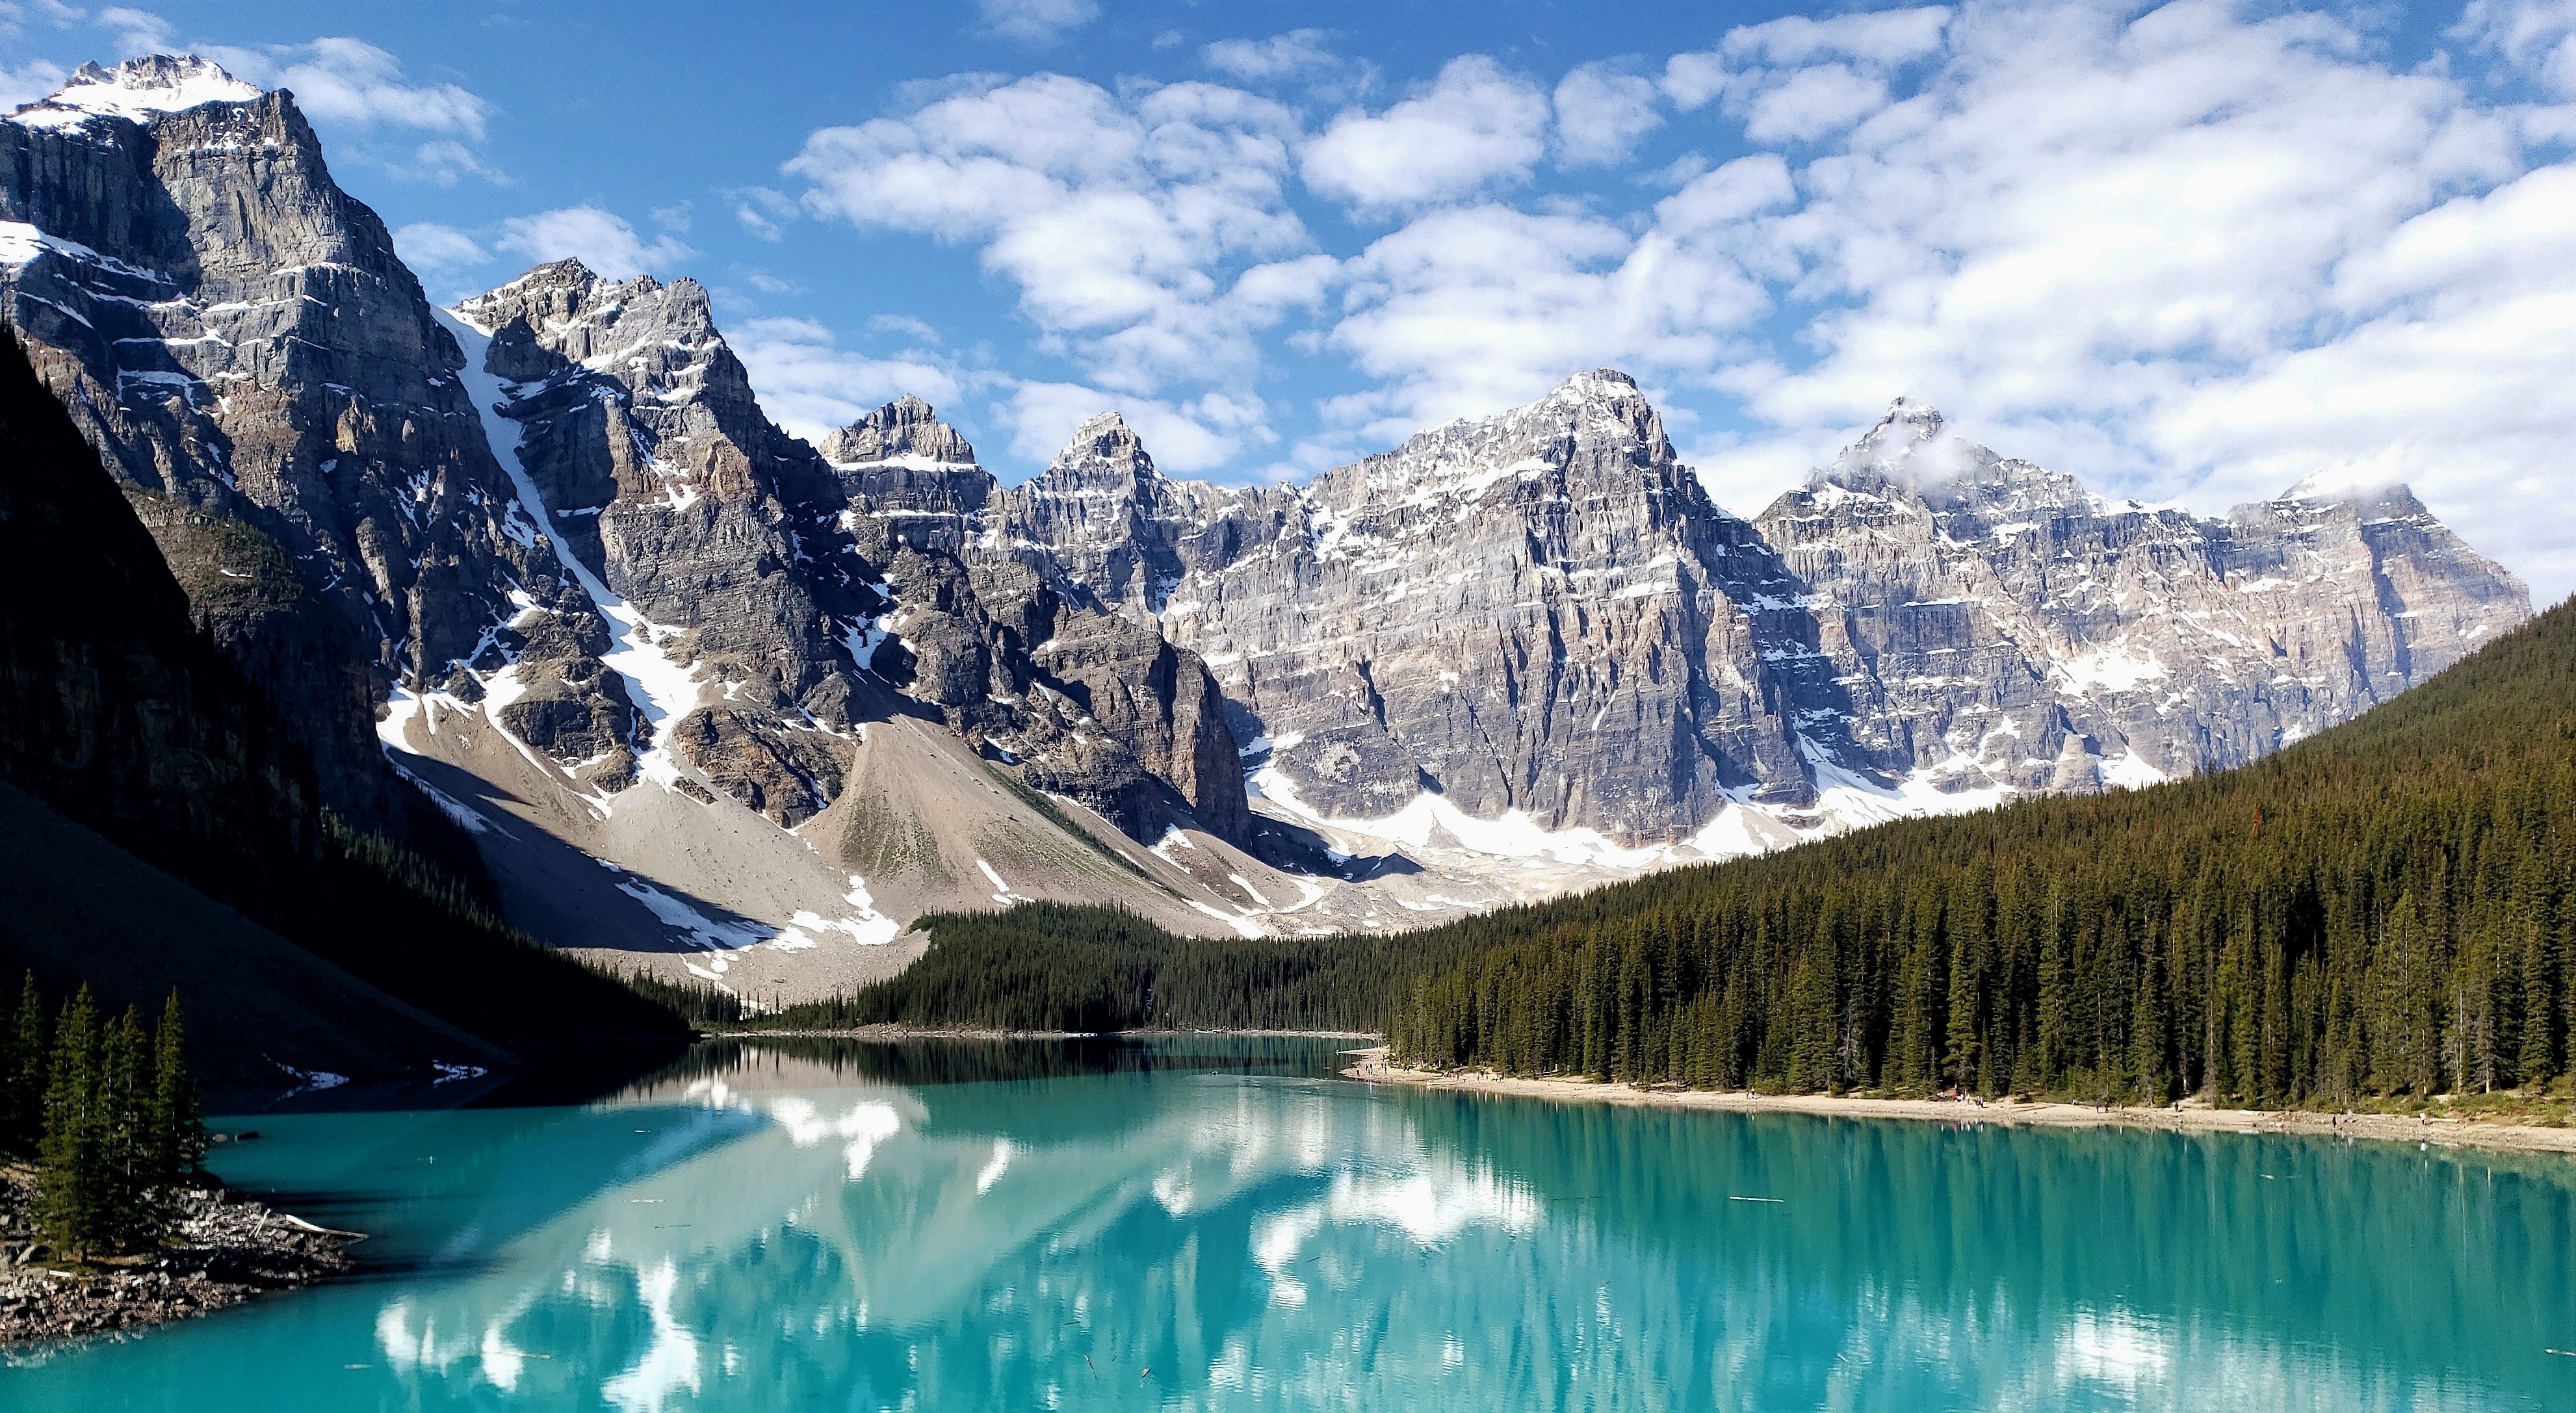 Moraine Lake and the Valley of Ten Peaks - Banff National Park, Alberta, Canada